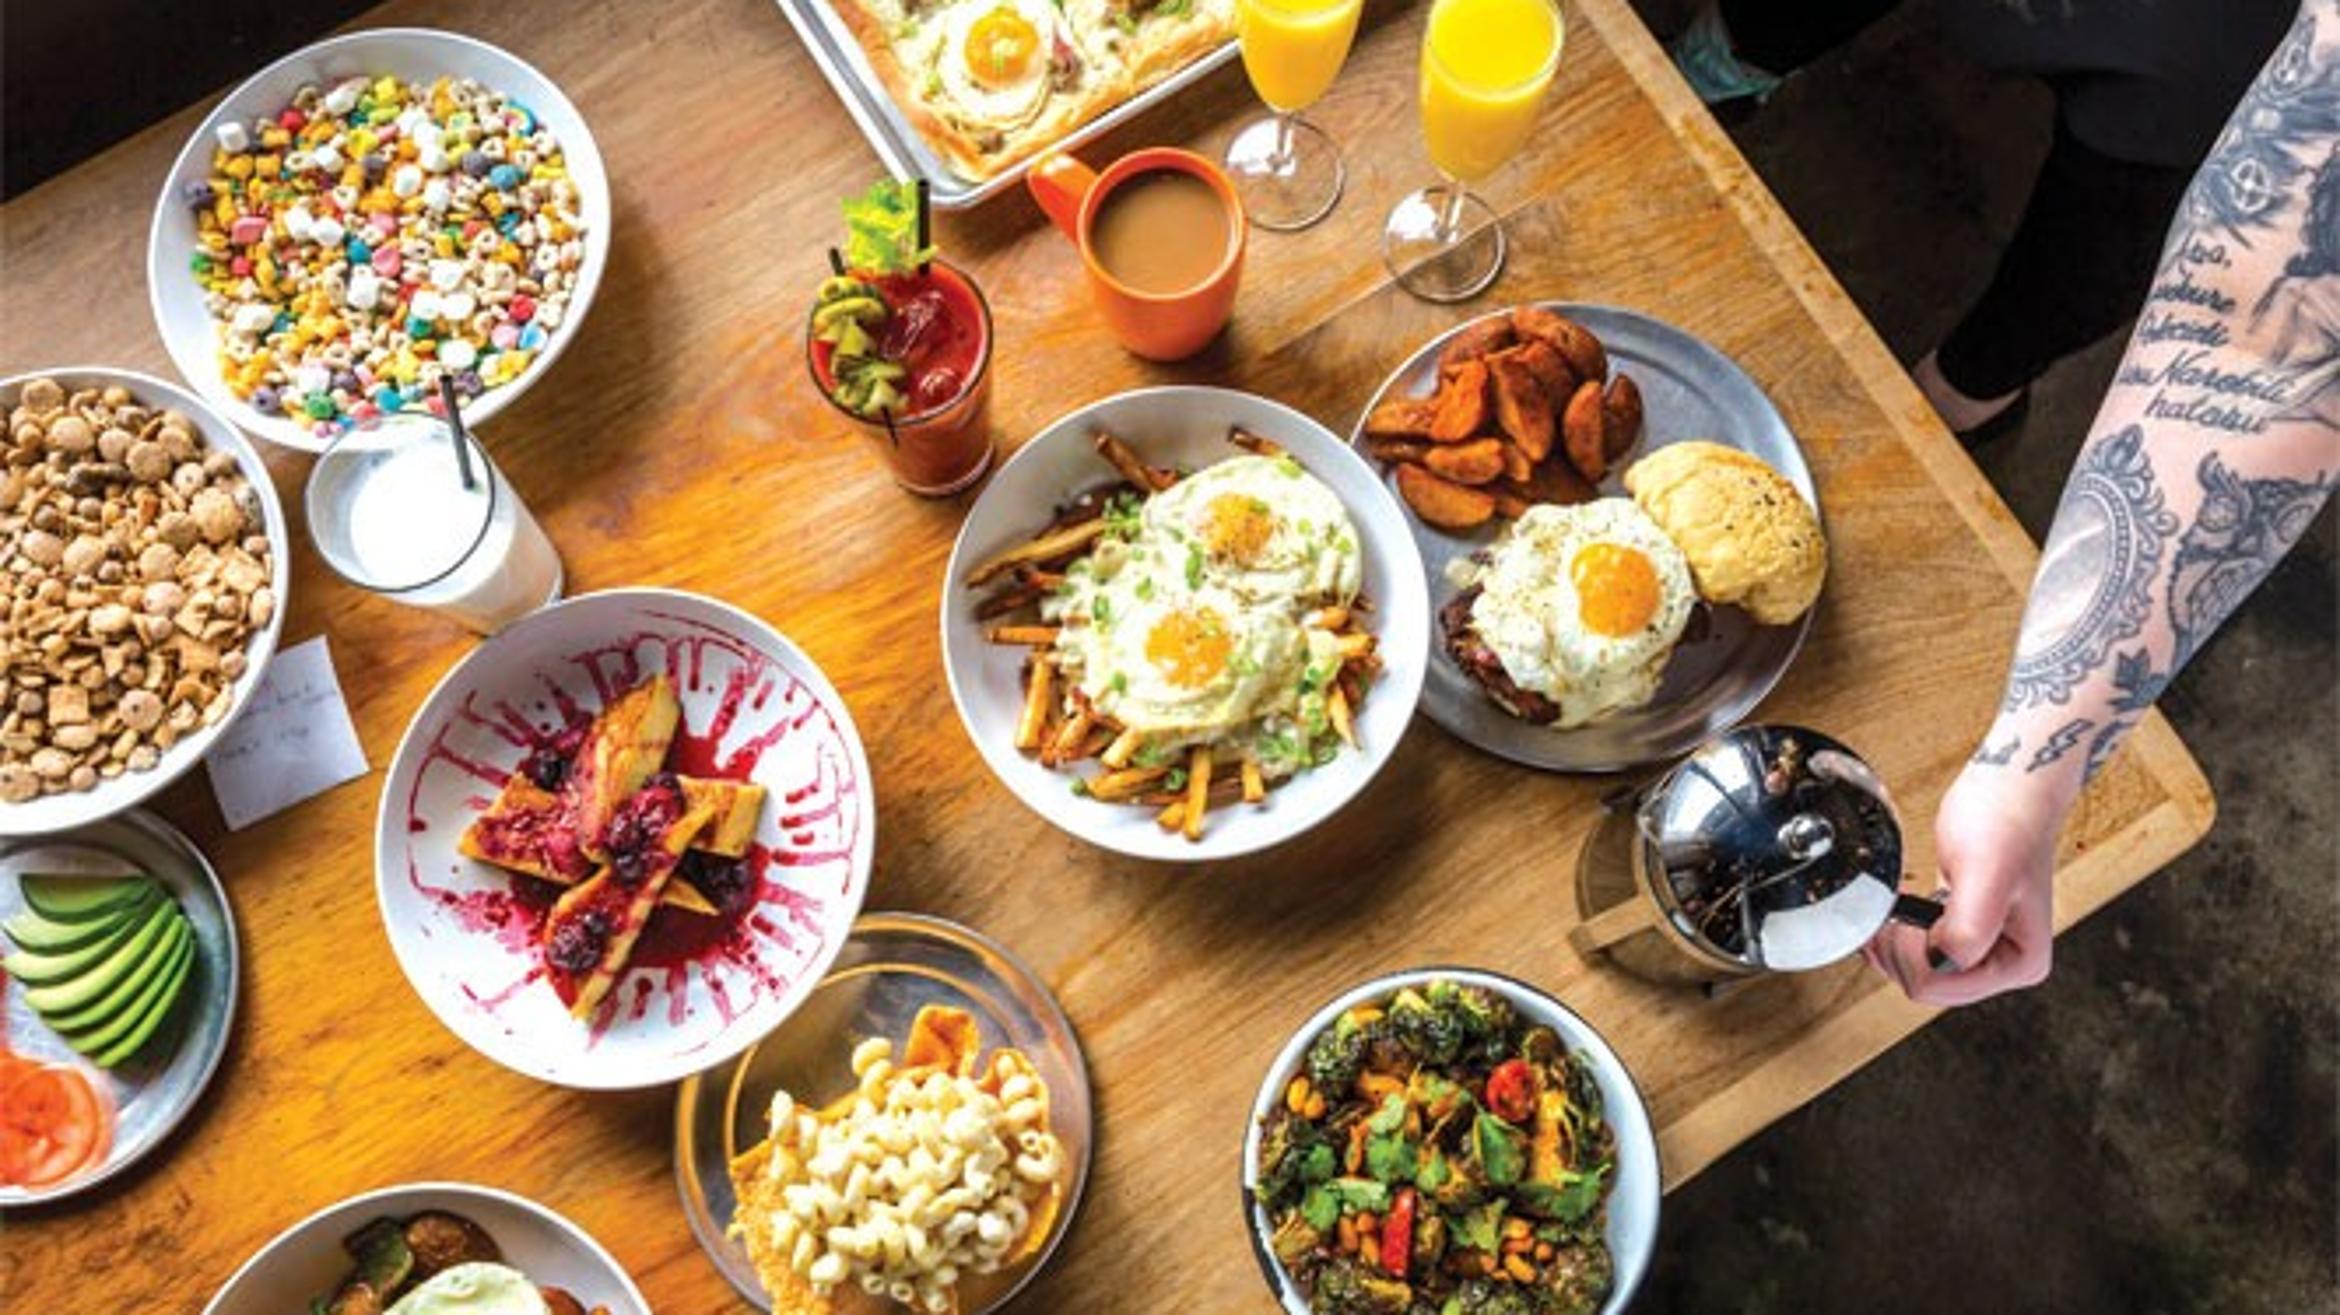 MetroTimes Takes on the Bounty of Brunch in Detroit WDET